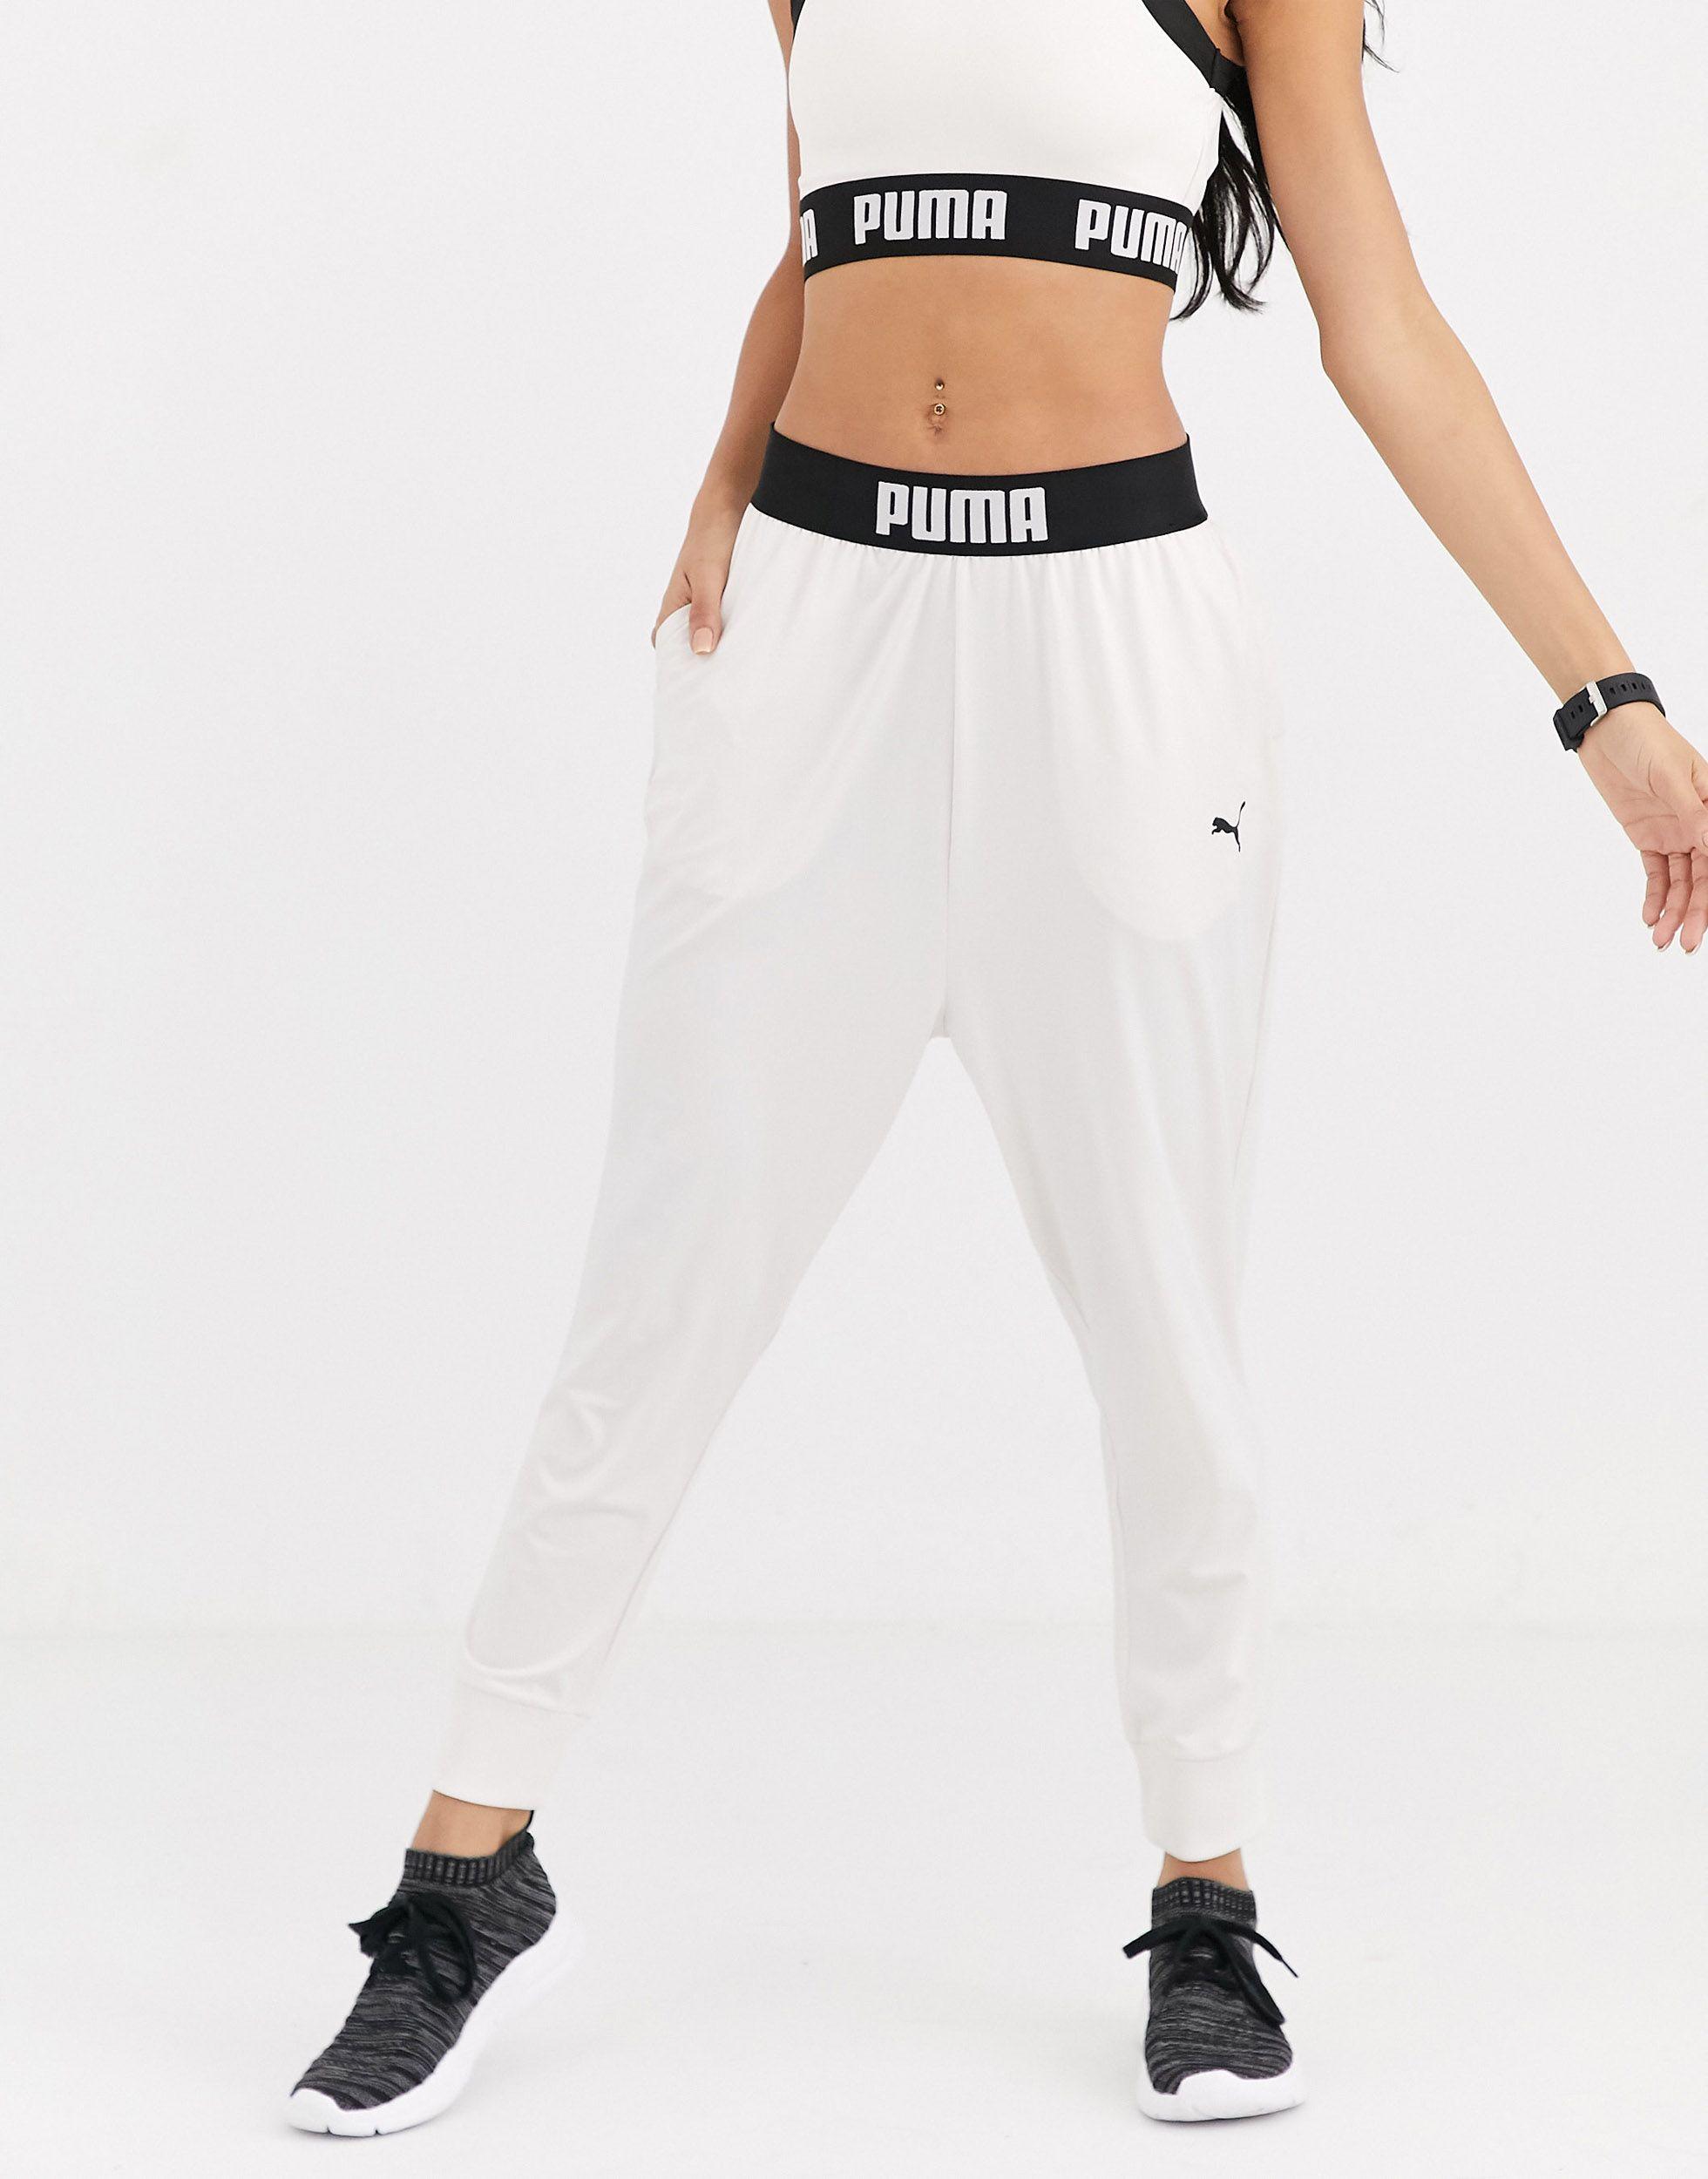 PUMA Exclusive To Asos Drapey Pants in White - Lyst